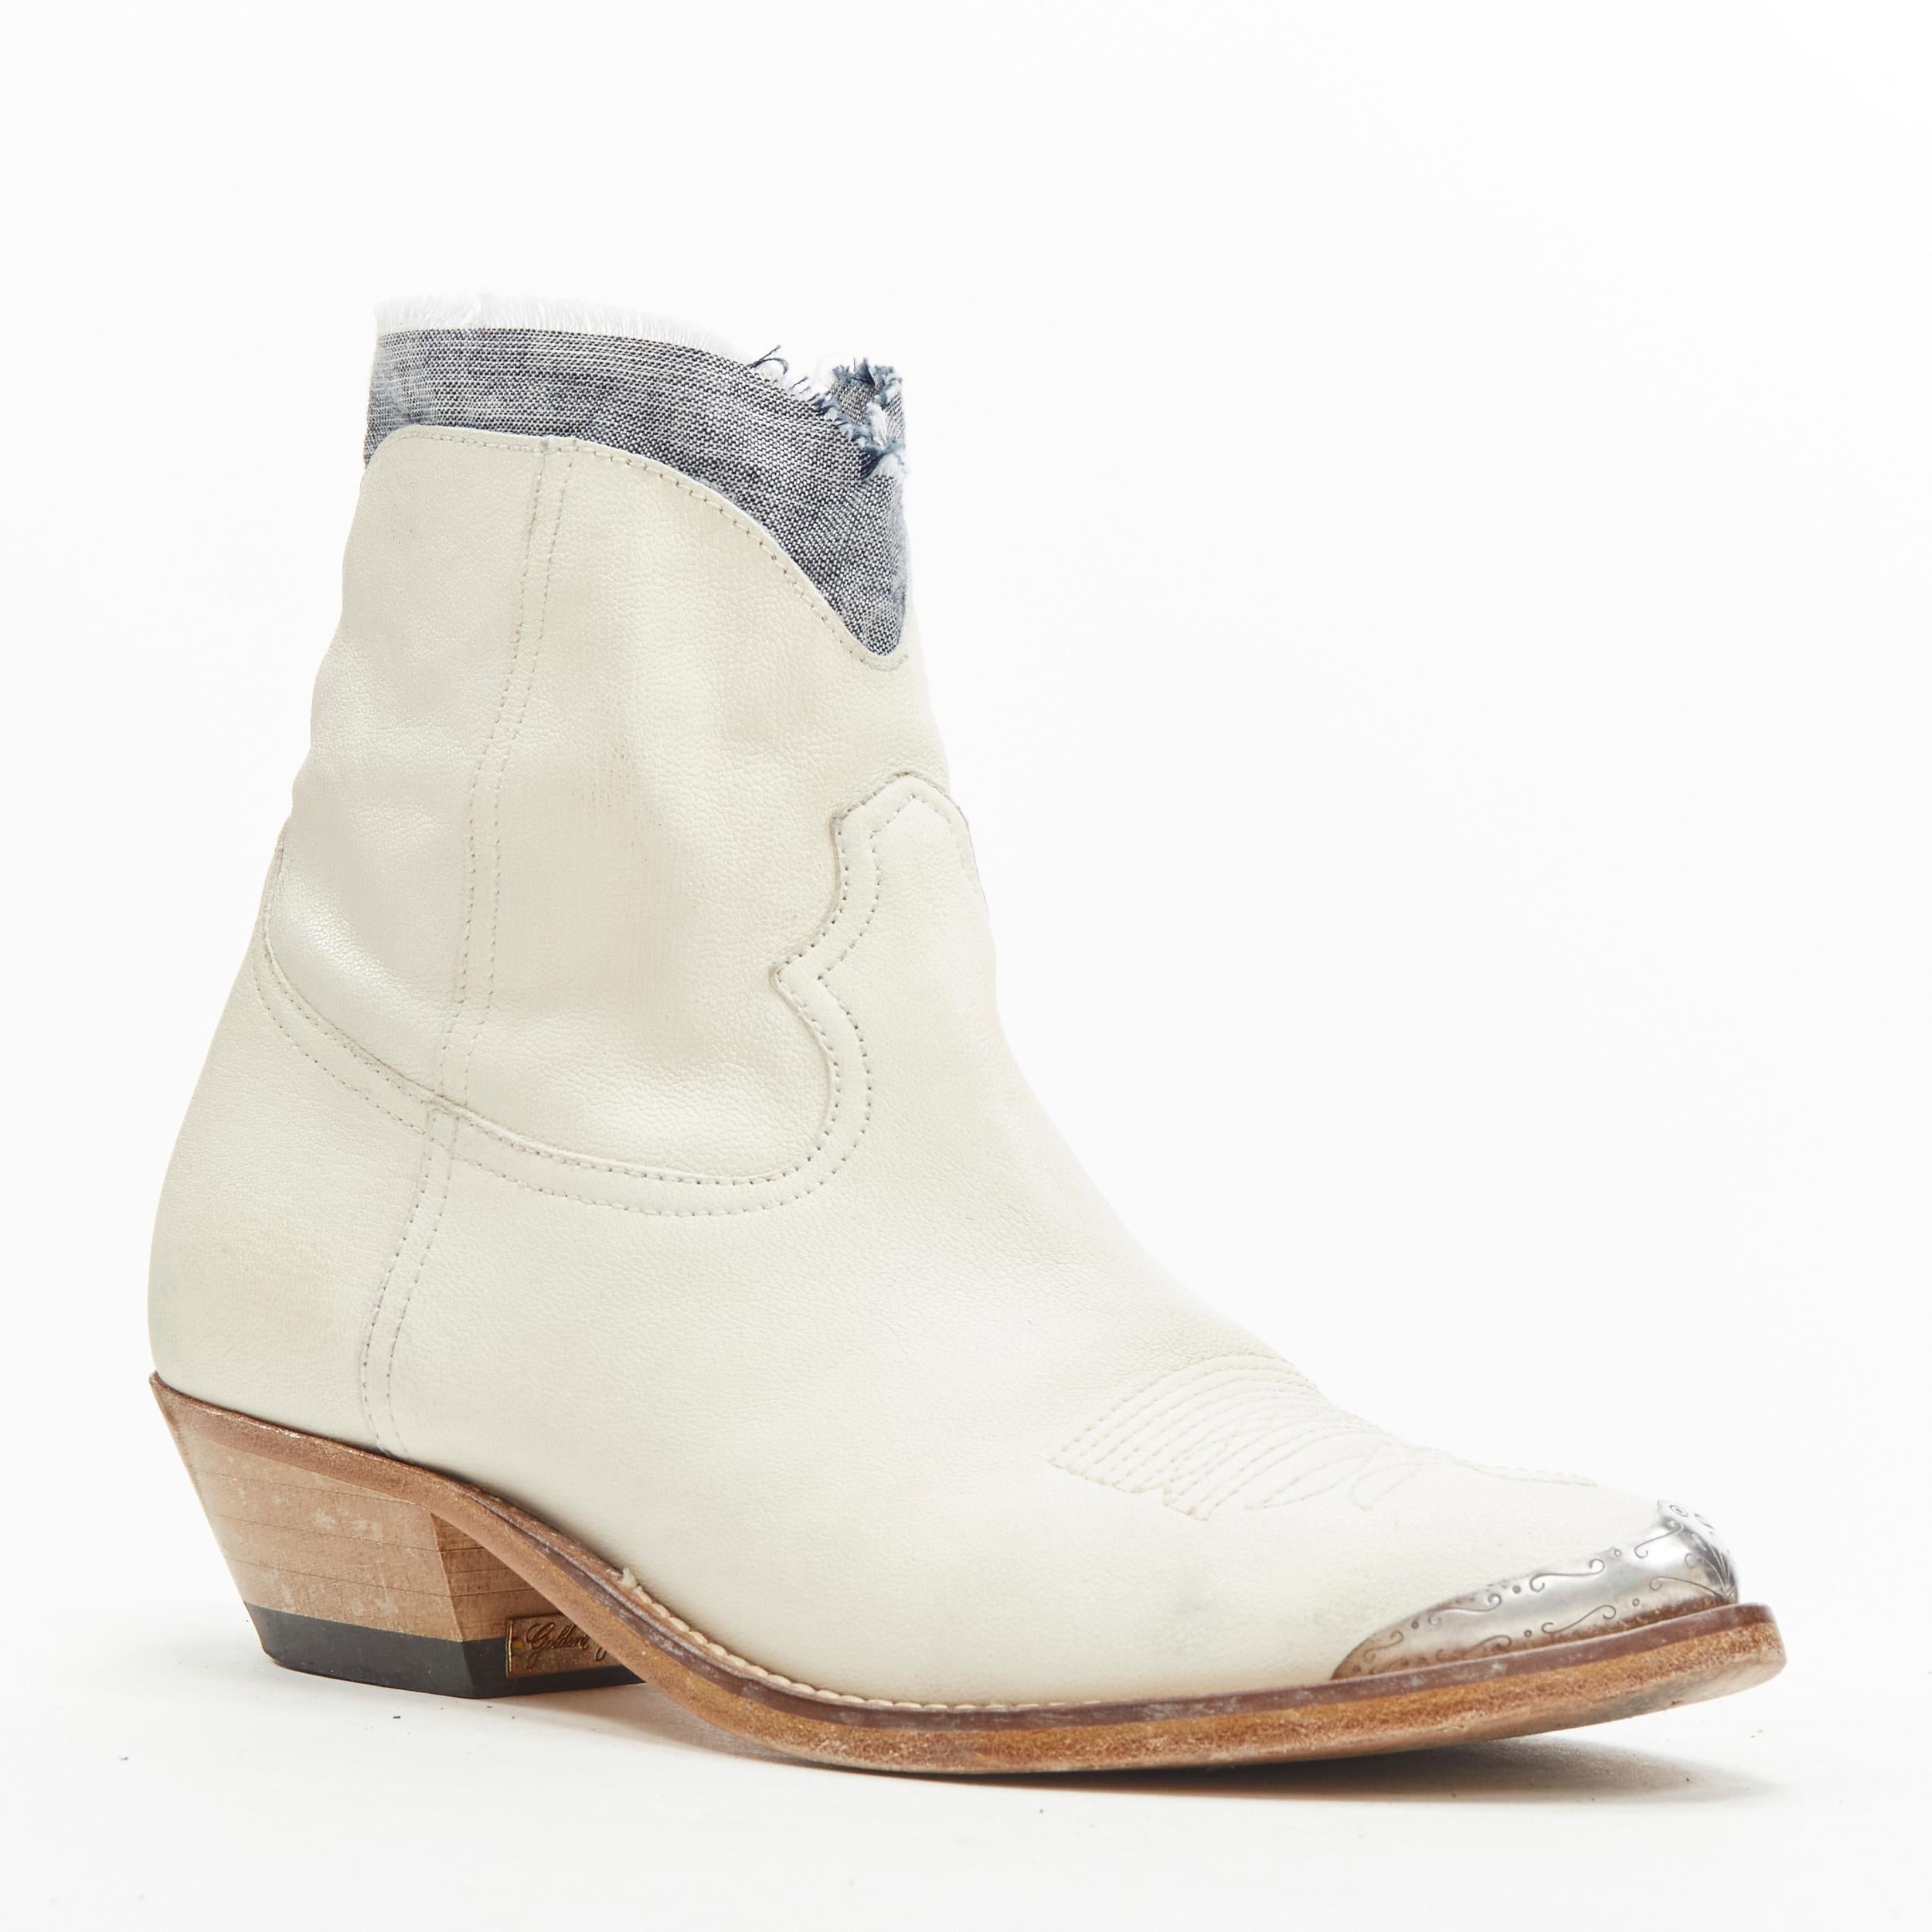 GOLDEN GOOSE white distressed leather drayed denim metal toe cowboy boots EU36
Reference: ANWU/A00173
Brand: Golden Goose
Material: Leather, Wood
Color: White
Pattern: Solid
Closure: Zip
Lining: Leather
Extra Details: Denim trim along opening.